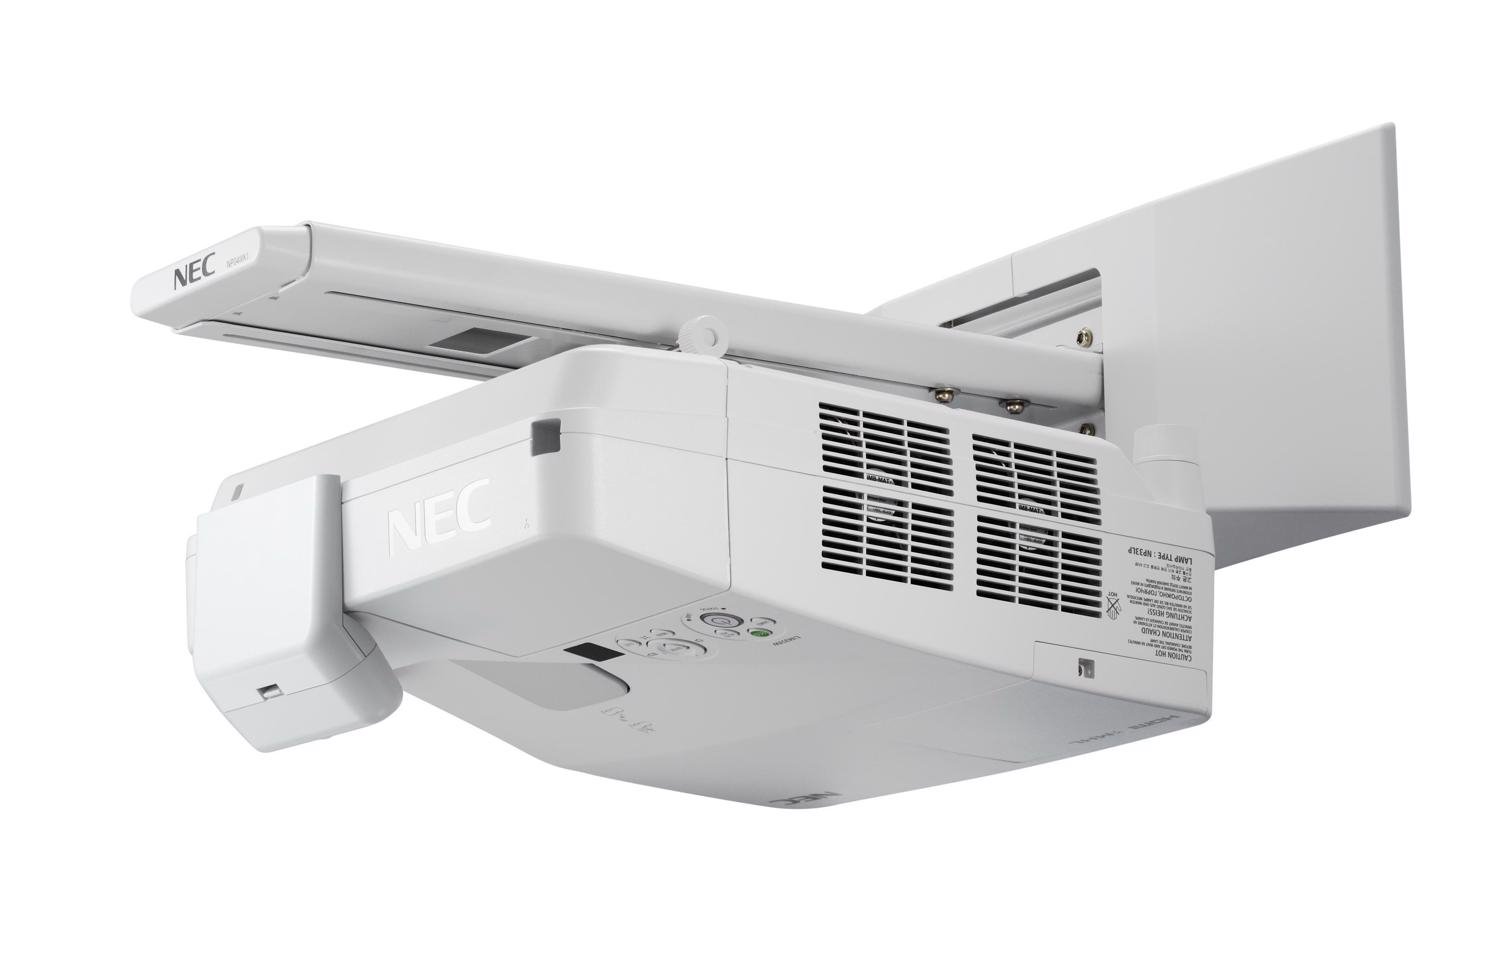 NEC Display NP-UM361X LCD Projector - 4:3 - White